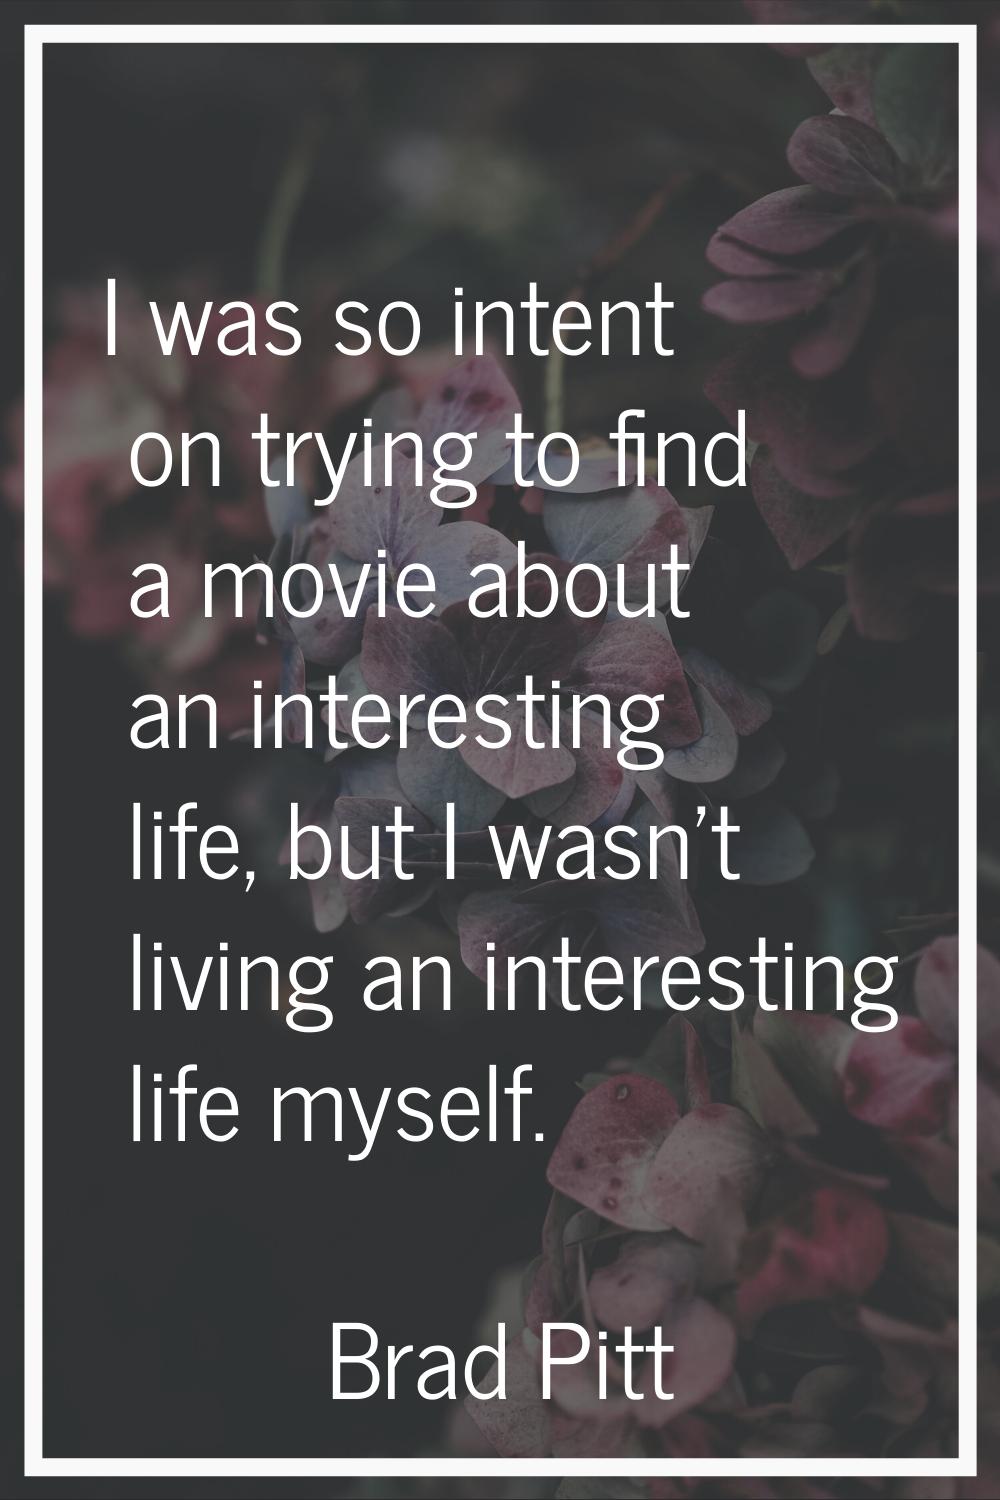 I was so intent on trying to find a movie about an interesting life, but I wasn't living an interes